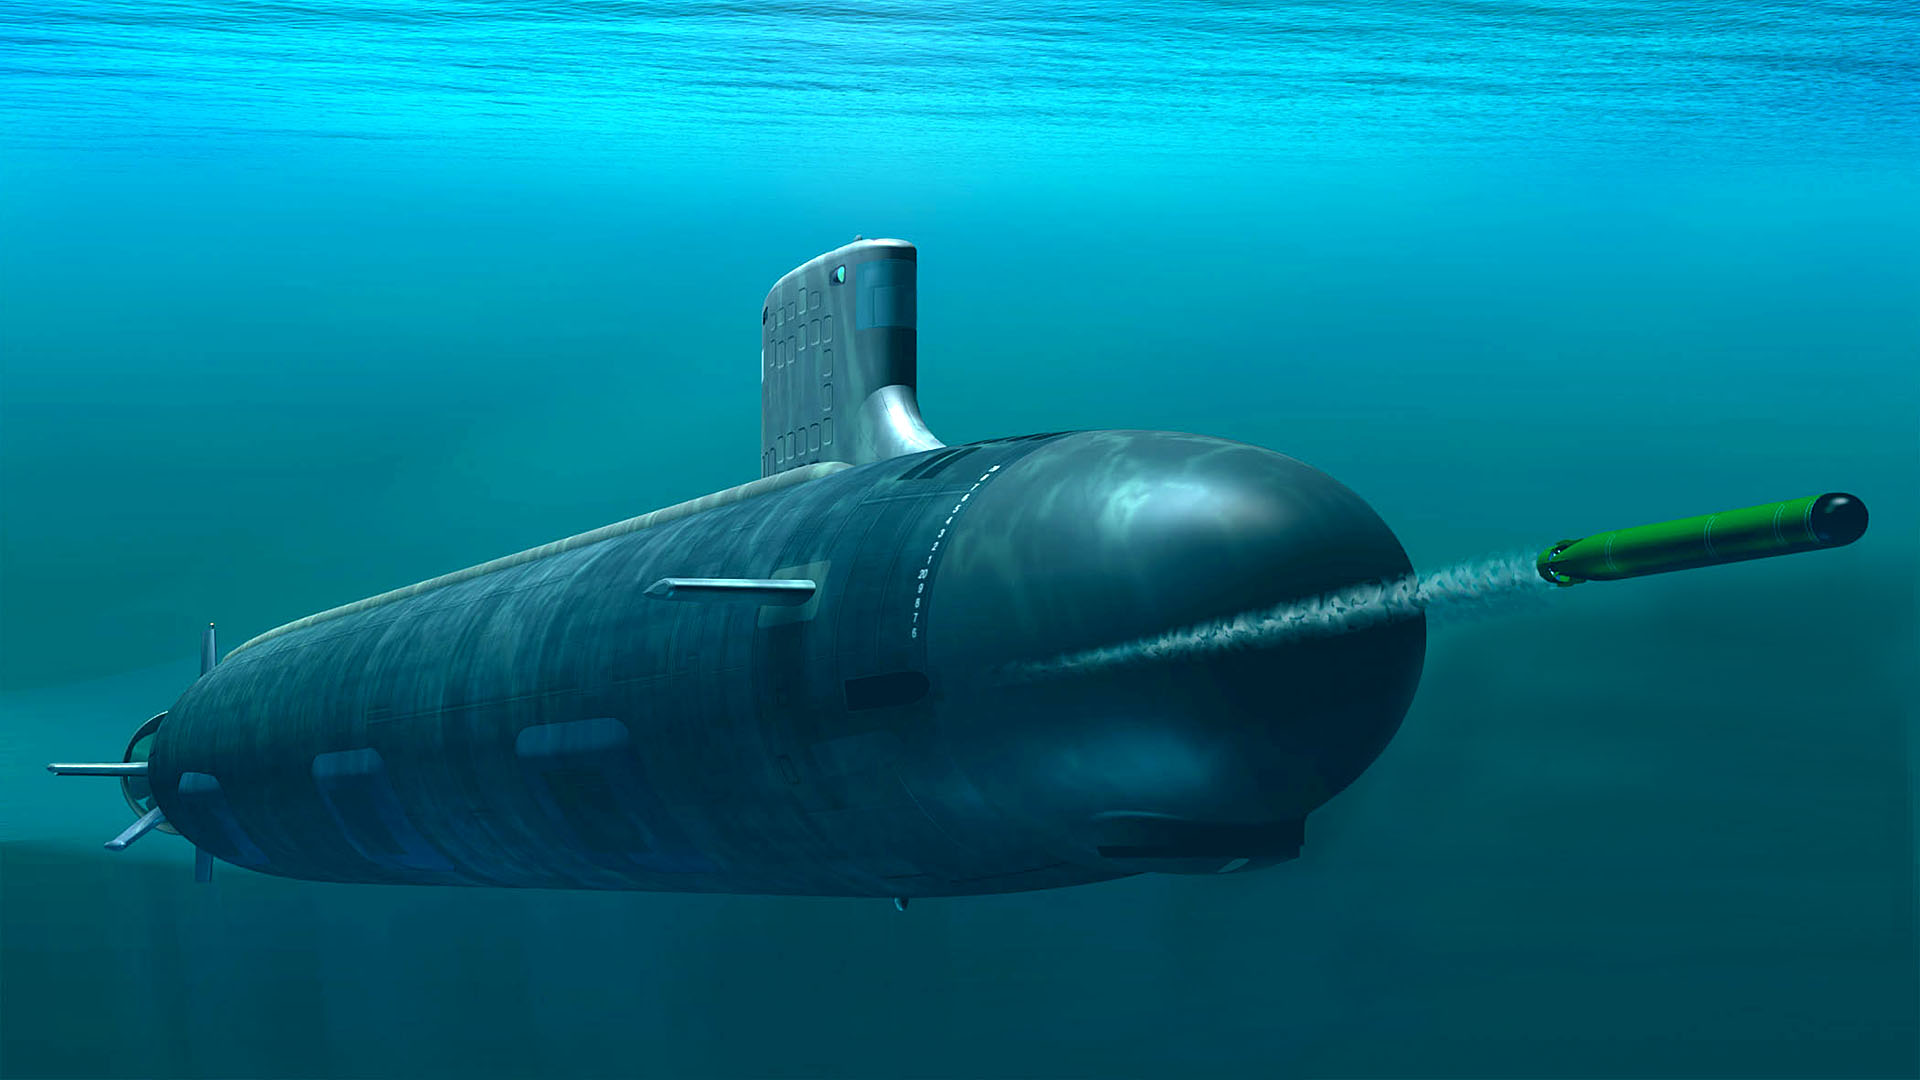 Submarine hd papers and backgrounds